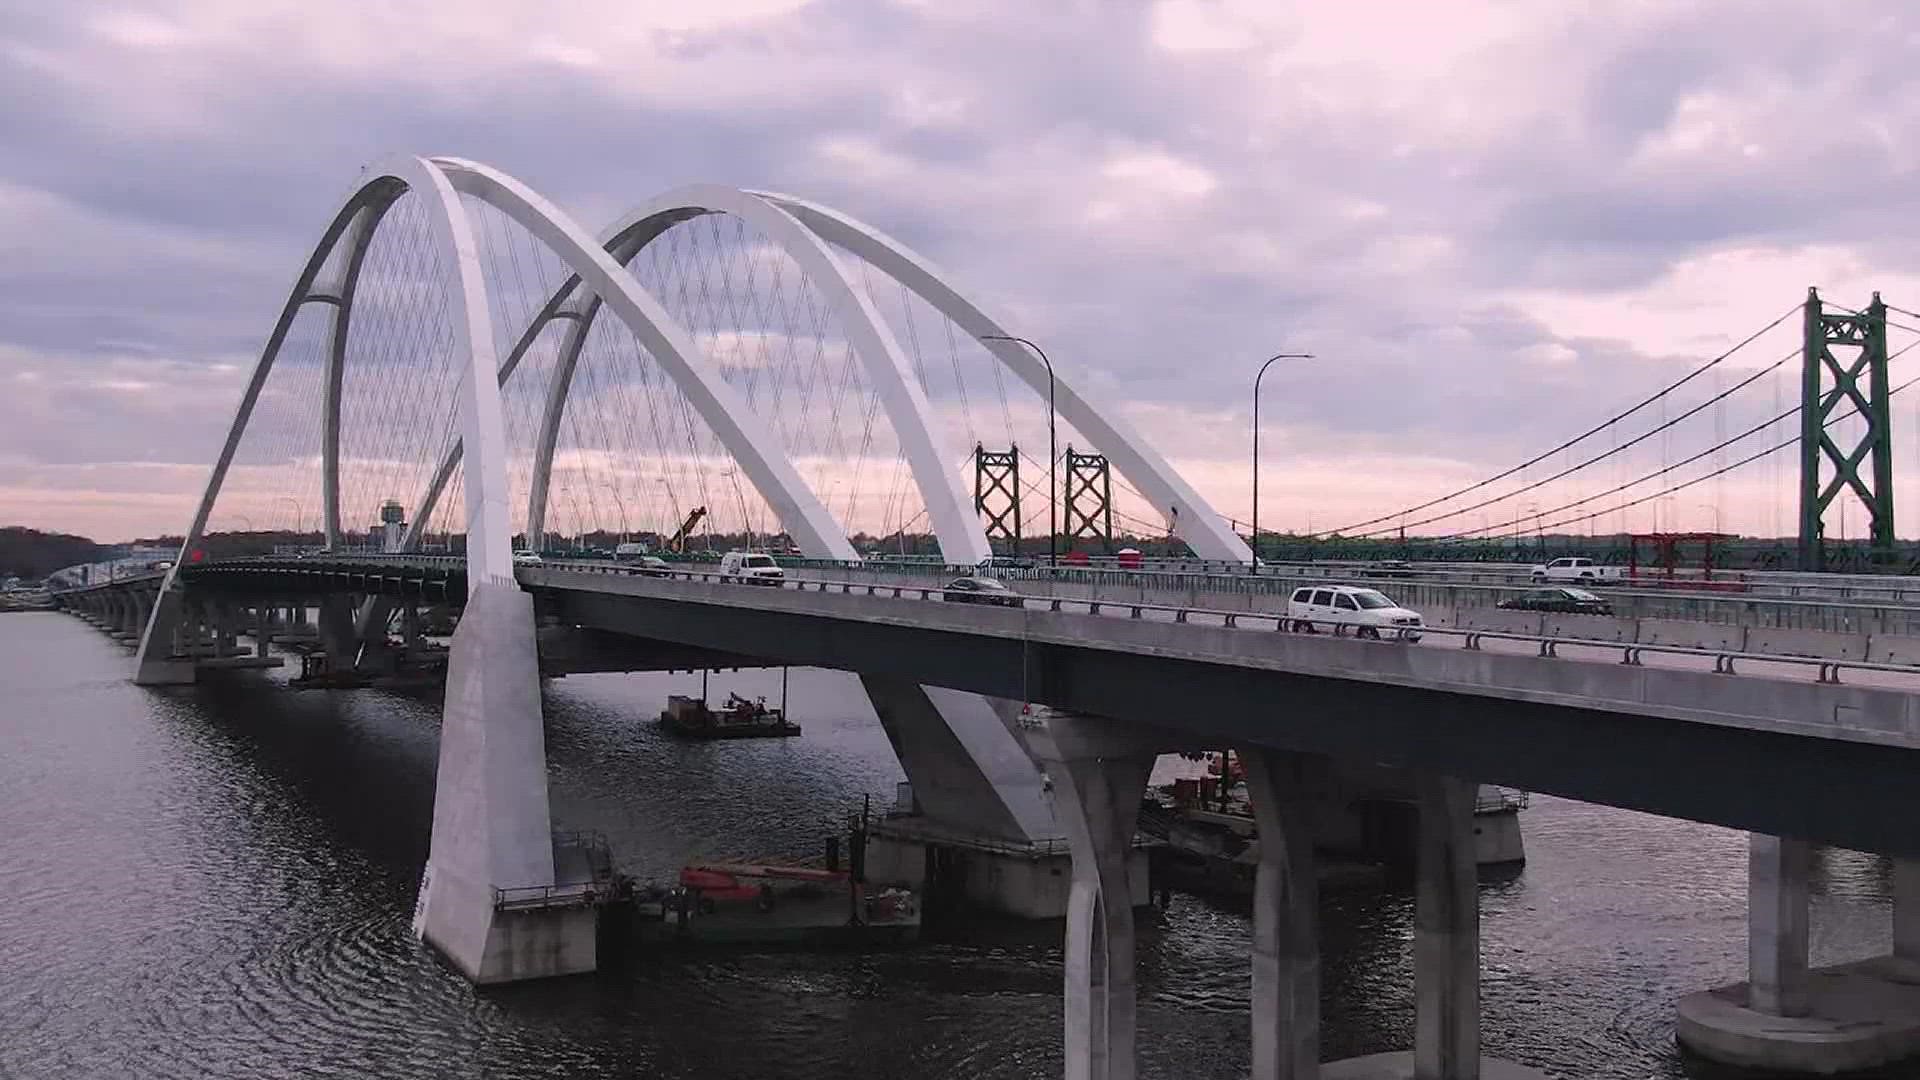 A public ceremony on Dec. 1 will let people walk across the bridge before the Illinois bound span opens just days later.